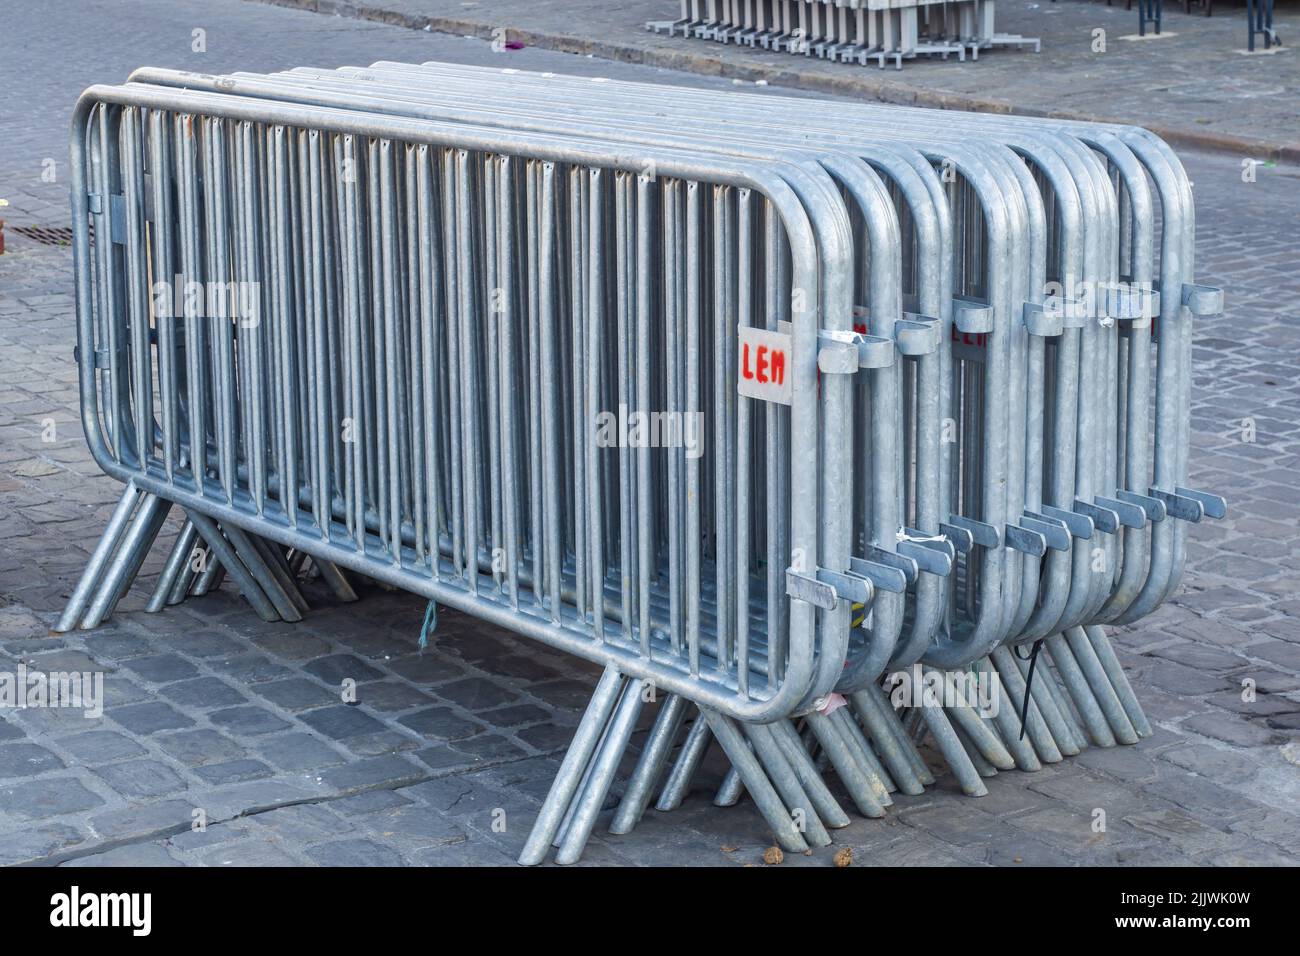 14.07.2 22 Charleville-Mézières, Ardennest, Gran d Est, France. Crowd control safety barriers are lightweight offer a robust form of crowd control onc Stock Photo